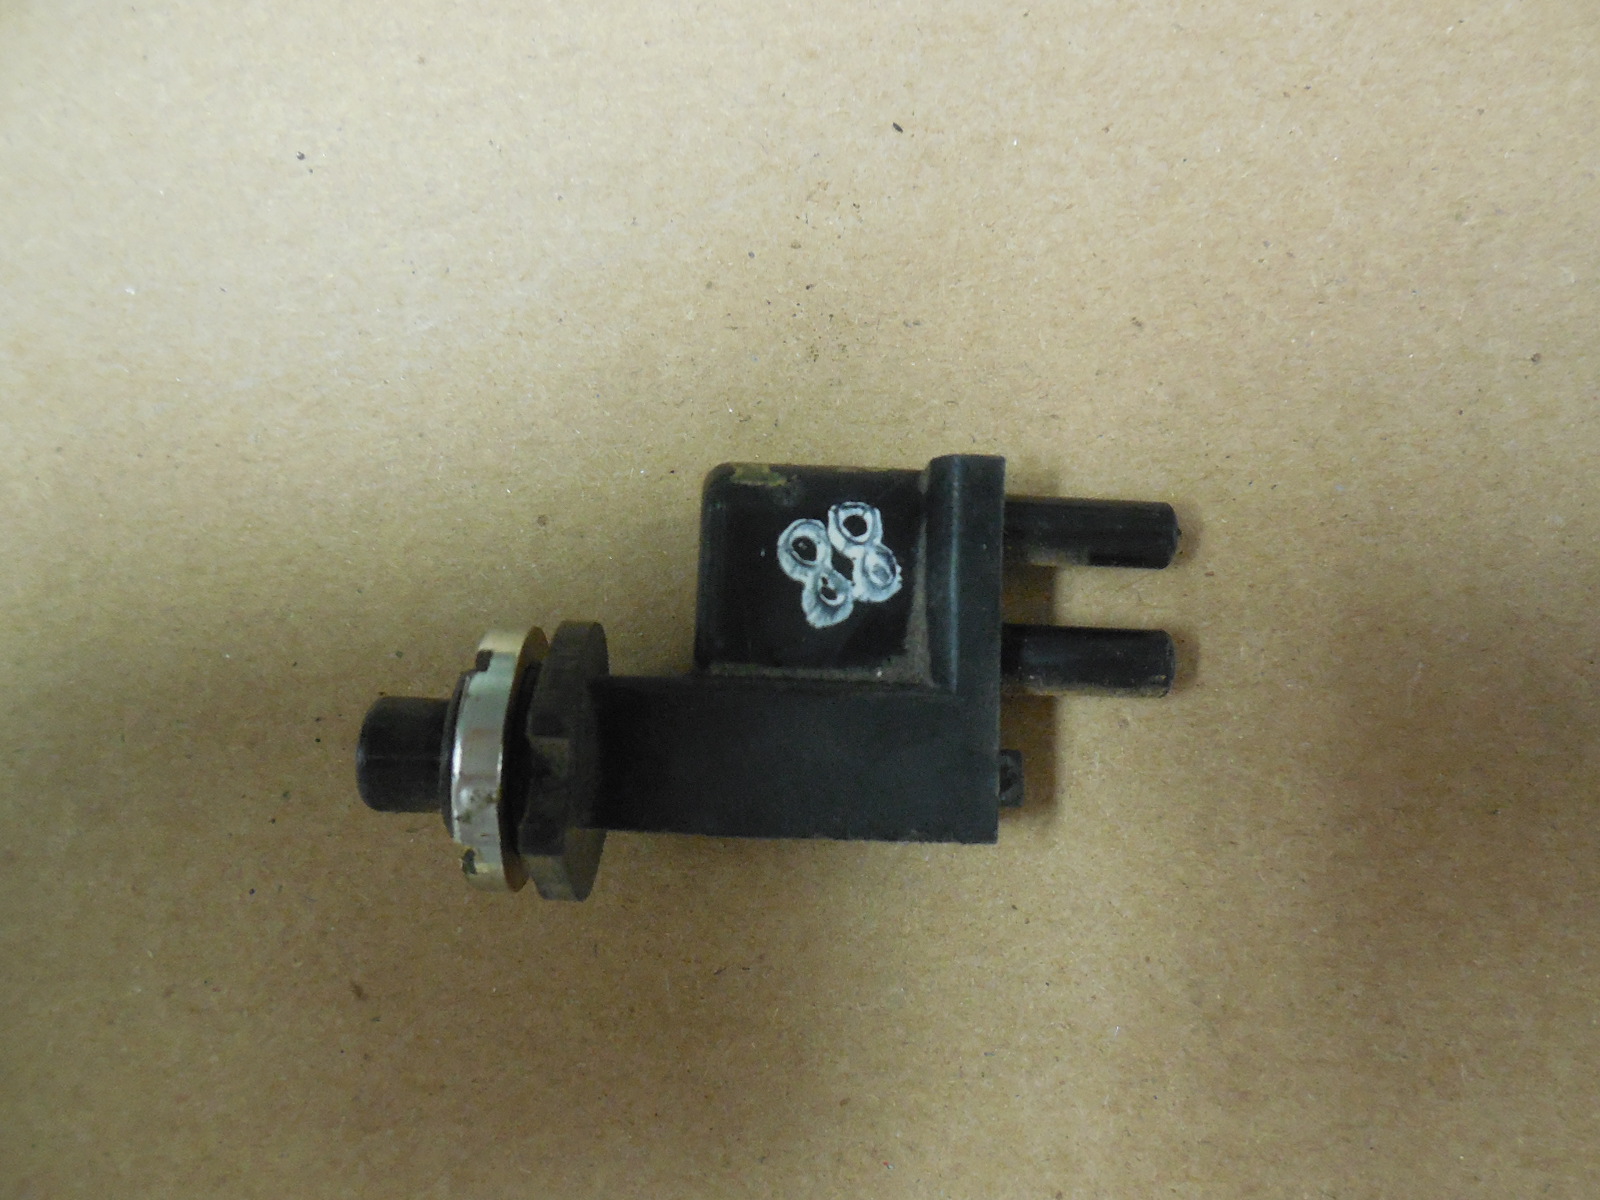 1969 Buick Wildcat Power Trunk Lock Latch and Actuator with Switch and Hoses